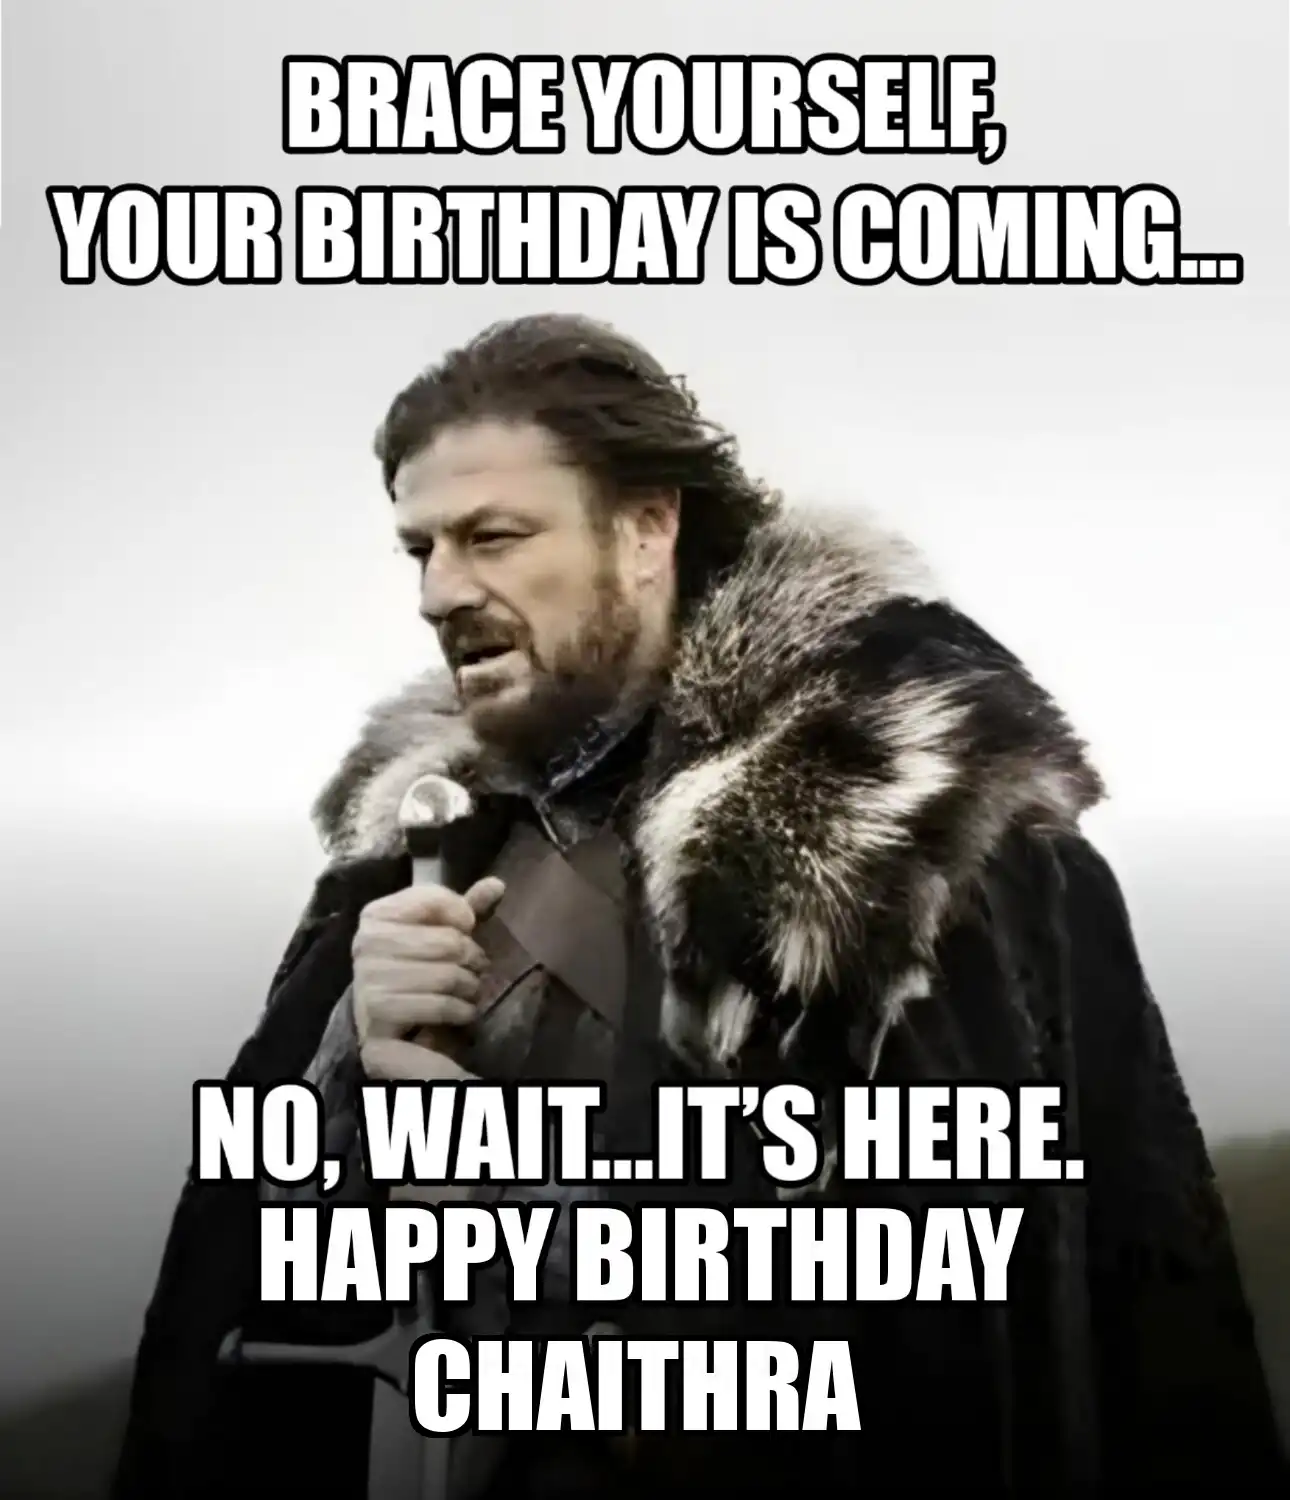 Happy Birthday Chaithra Brace Yourself Your Birthday Is Coming Meme